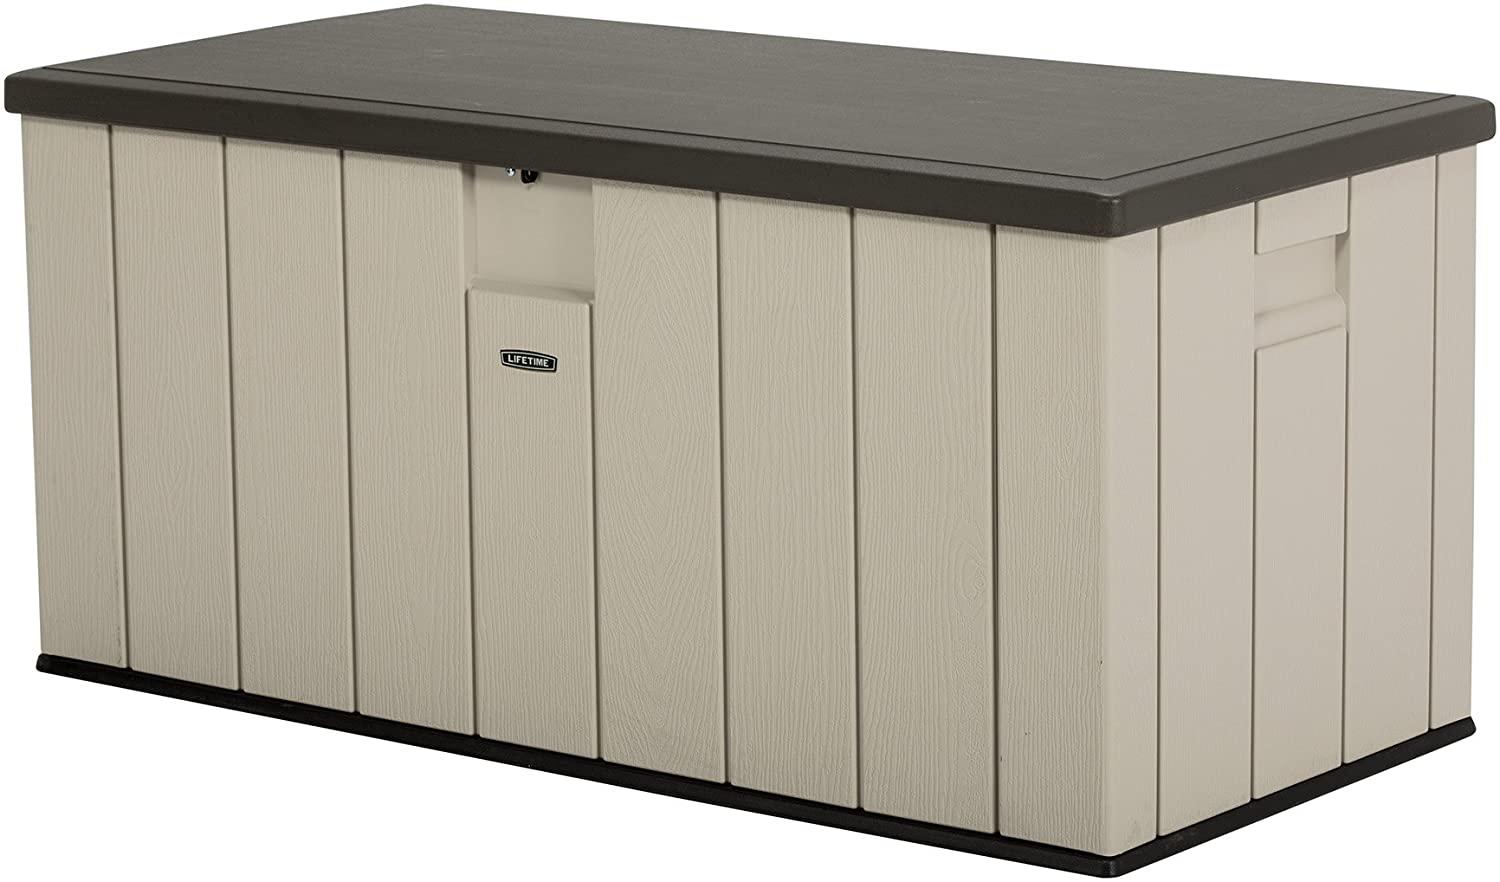 Lifetime 150-Gallon Heavy-Duty Outdoor Storage Deck Box for $169.92 Shipped